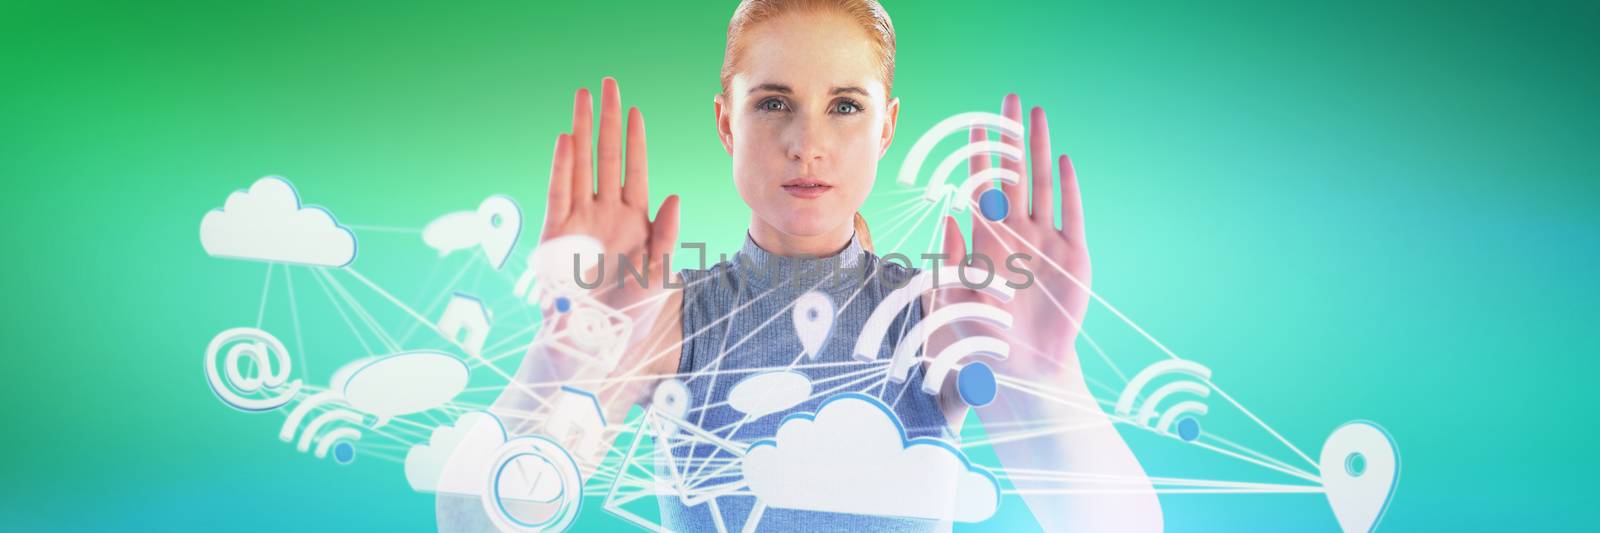 Composite image of portrait of serious businesswoman showing stop gesture by Wavebreakmedia